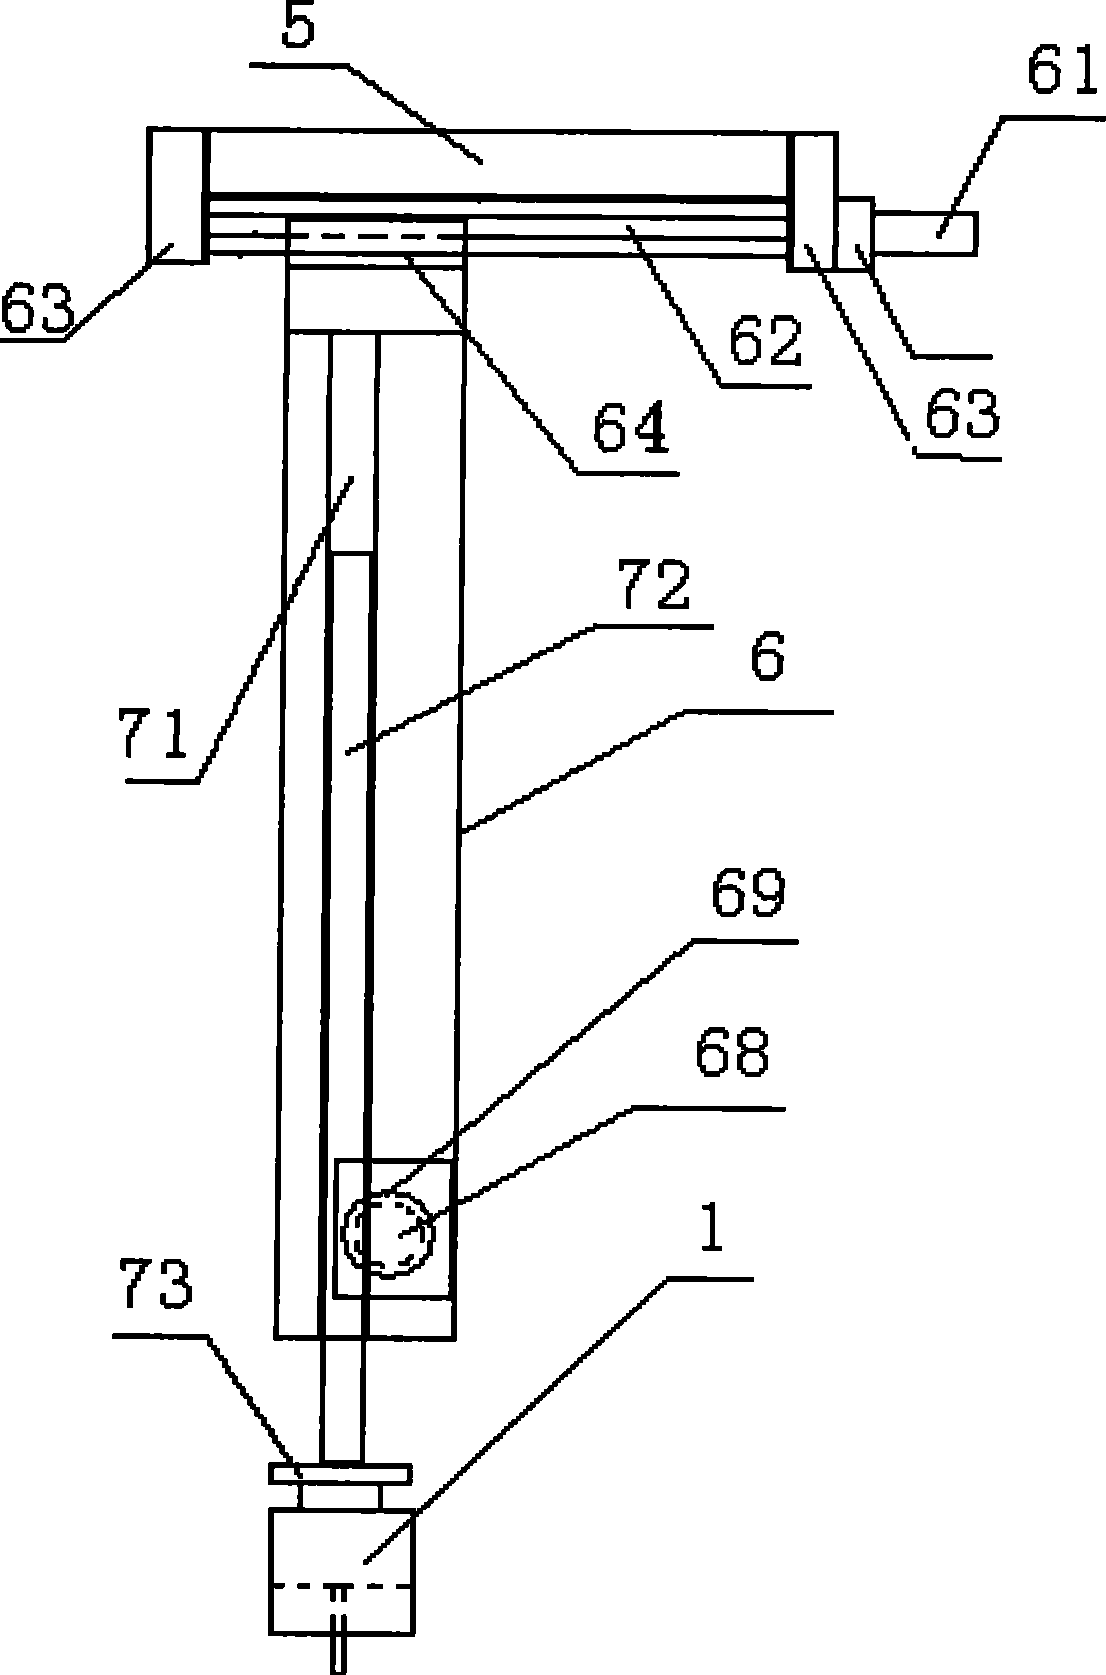 Device for testing resistance across steel plate surface for appliances